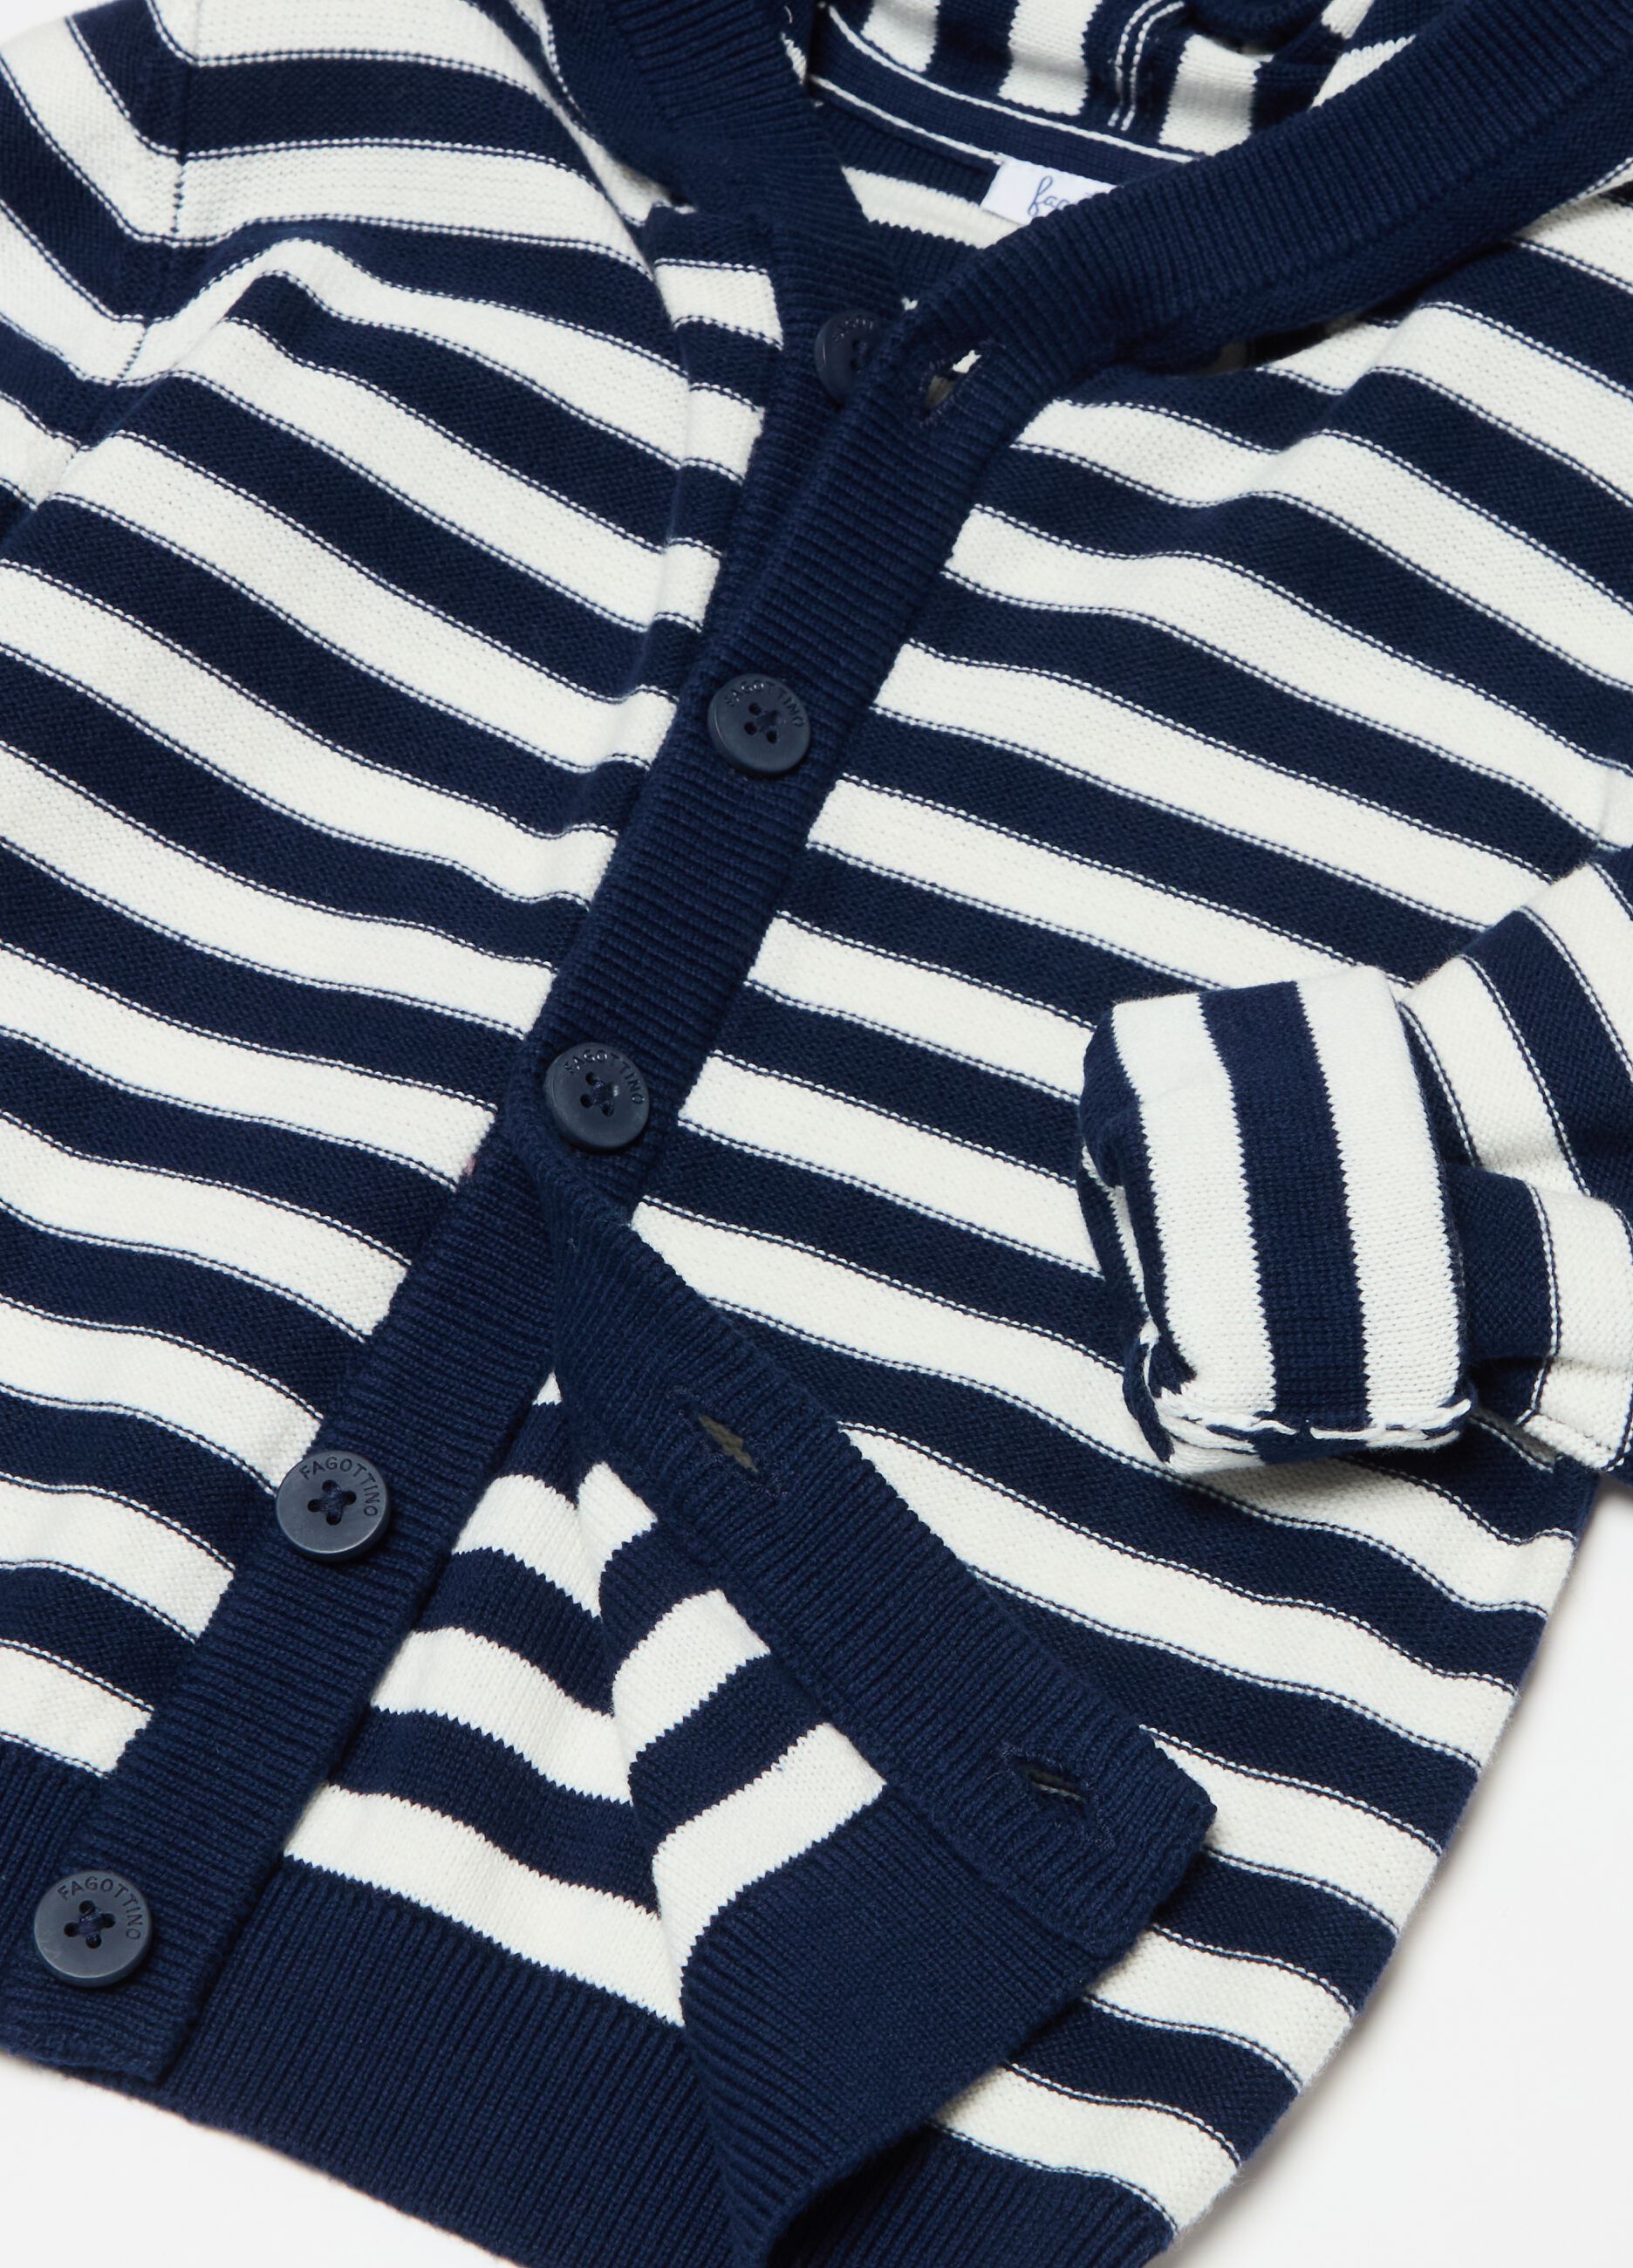 Striped cotton cardigan with hood